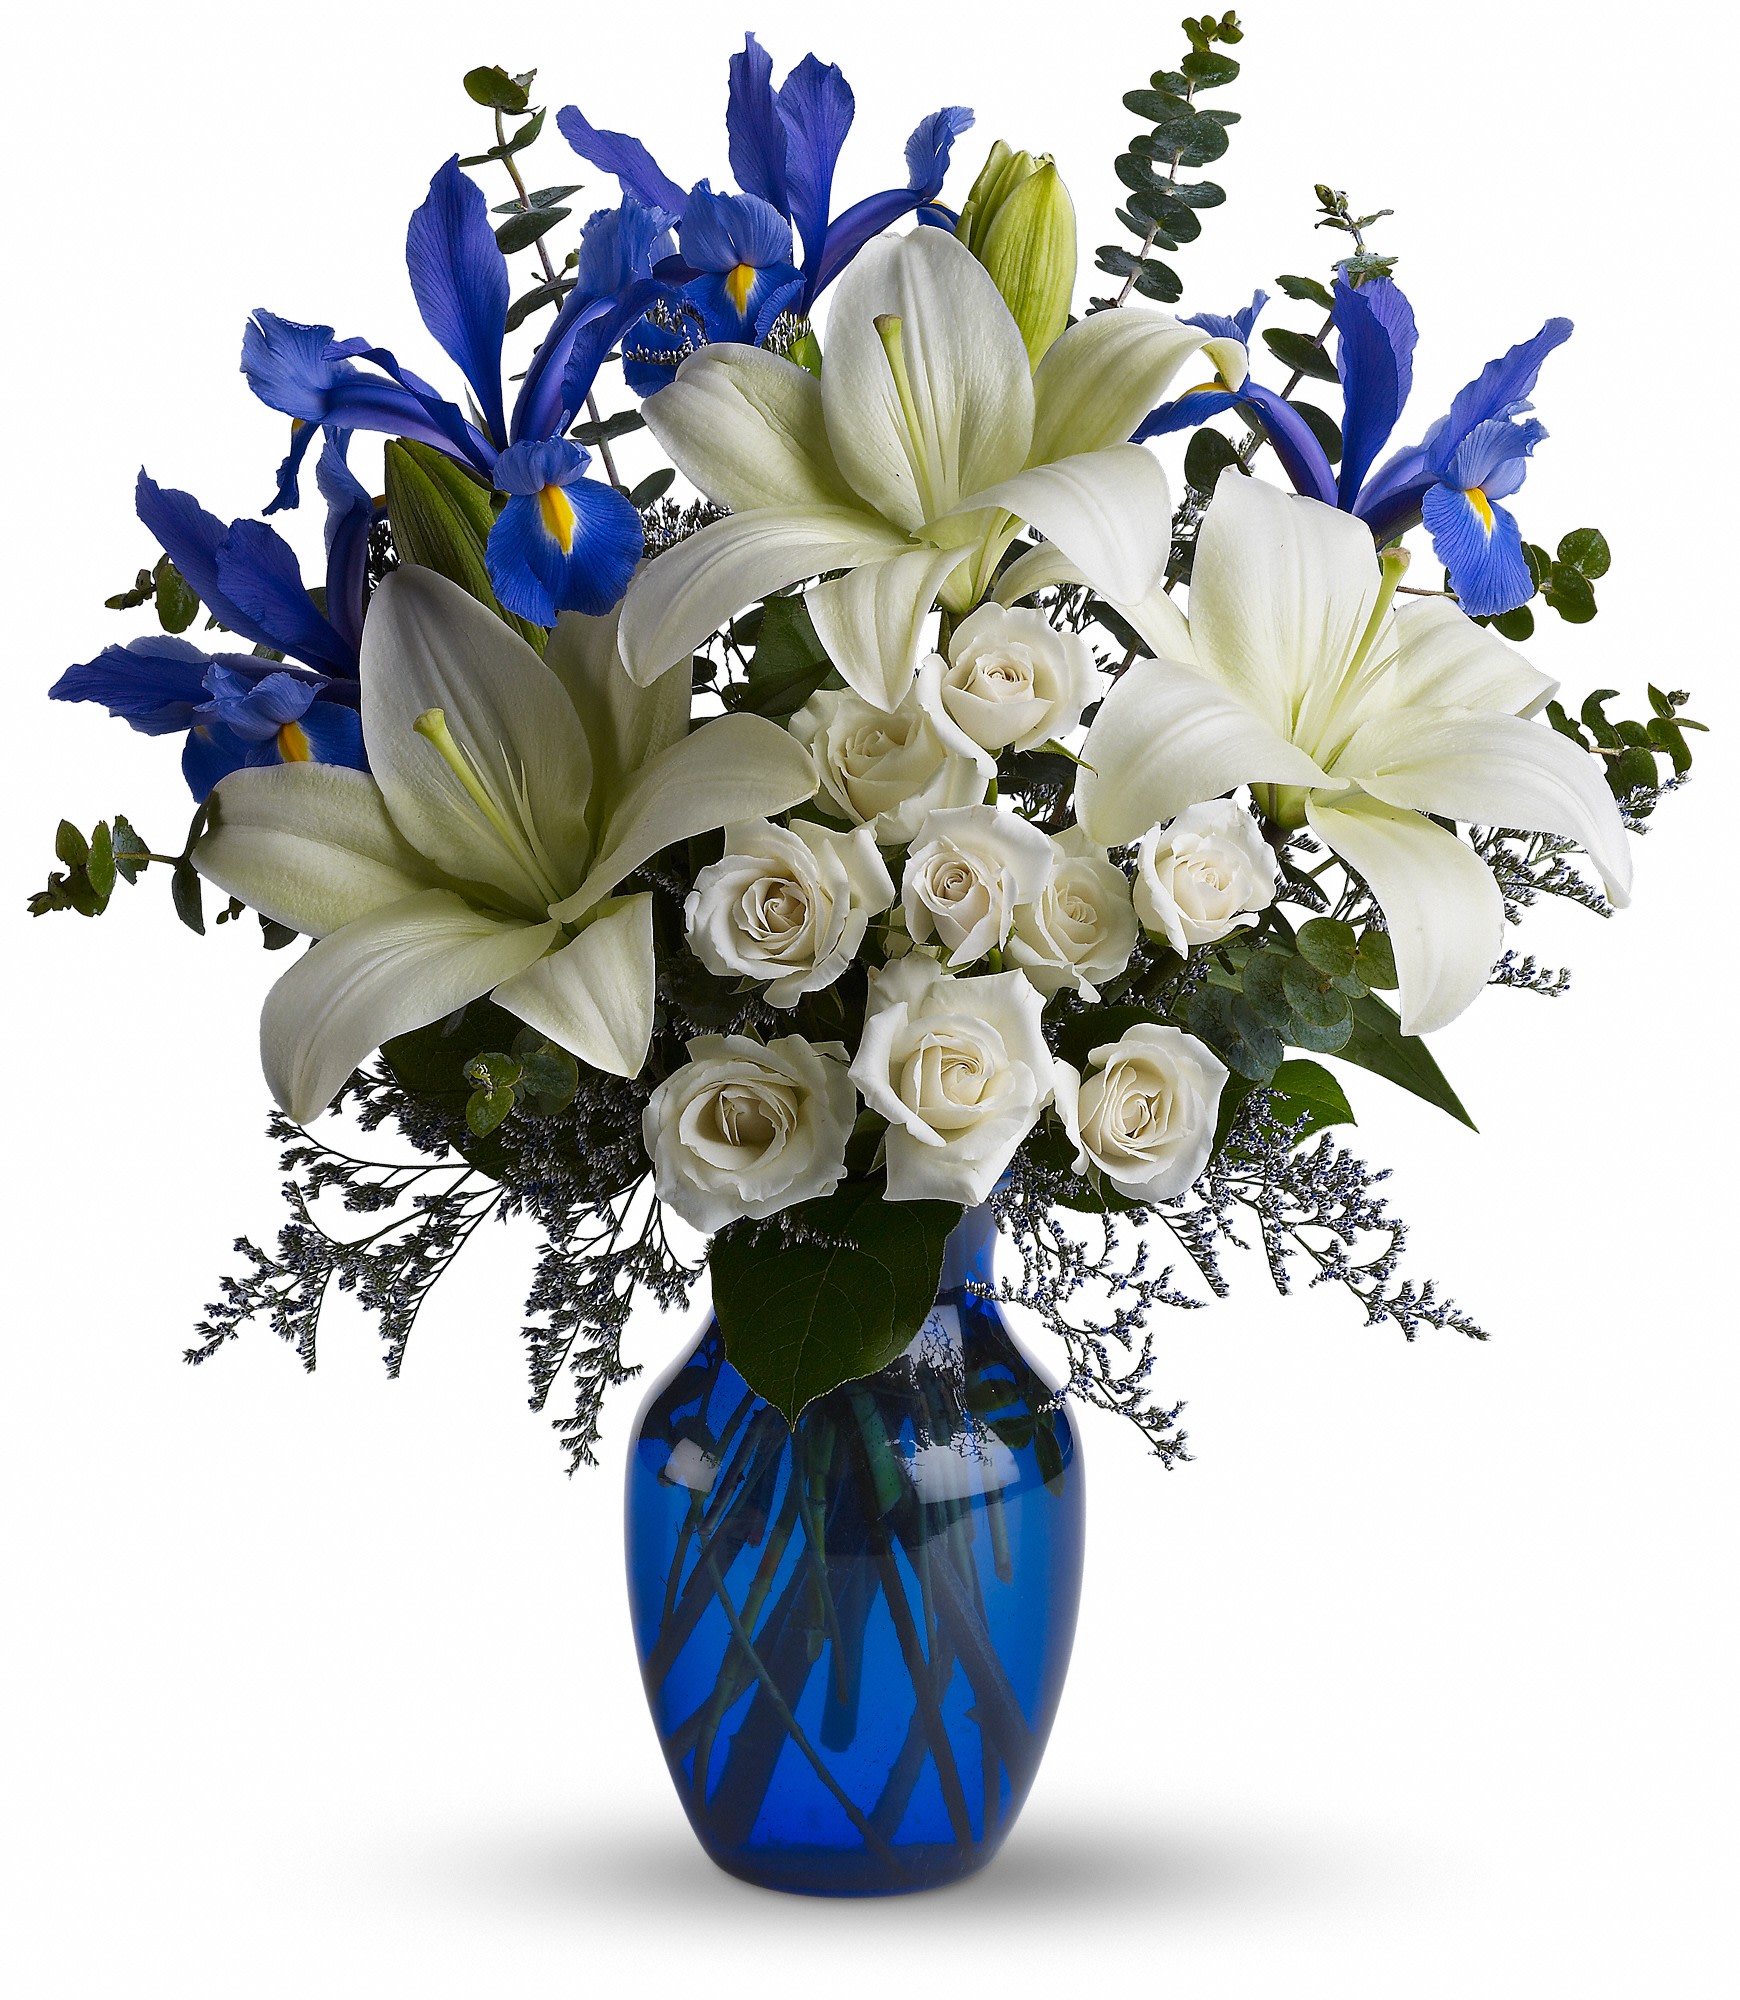 Blue Horizons by Teleflora - As open and bright as a winter's sky, this exquisite mix of white and blue blossoms would make a stunning birthday gift, or a superb Hanukah present for a favorite friend or family member. An eye-catching selection. 